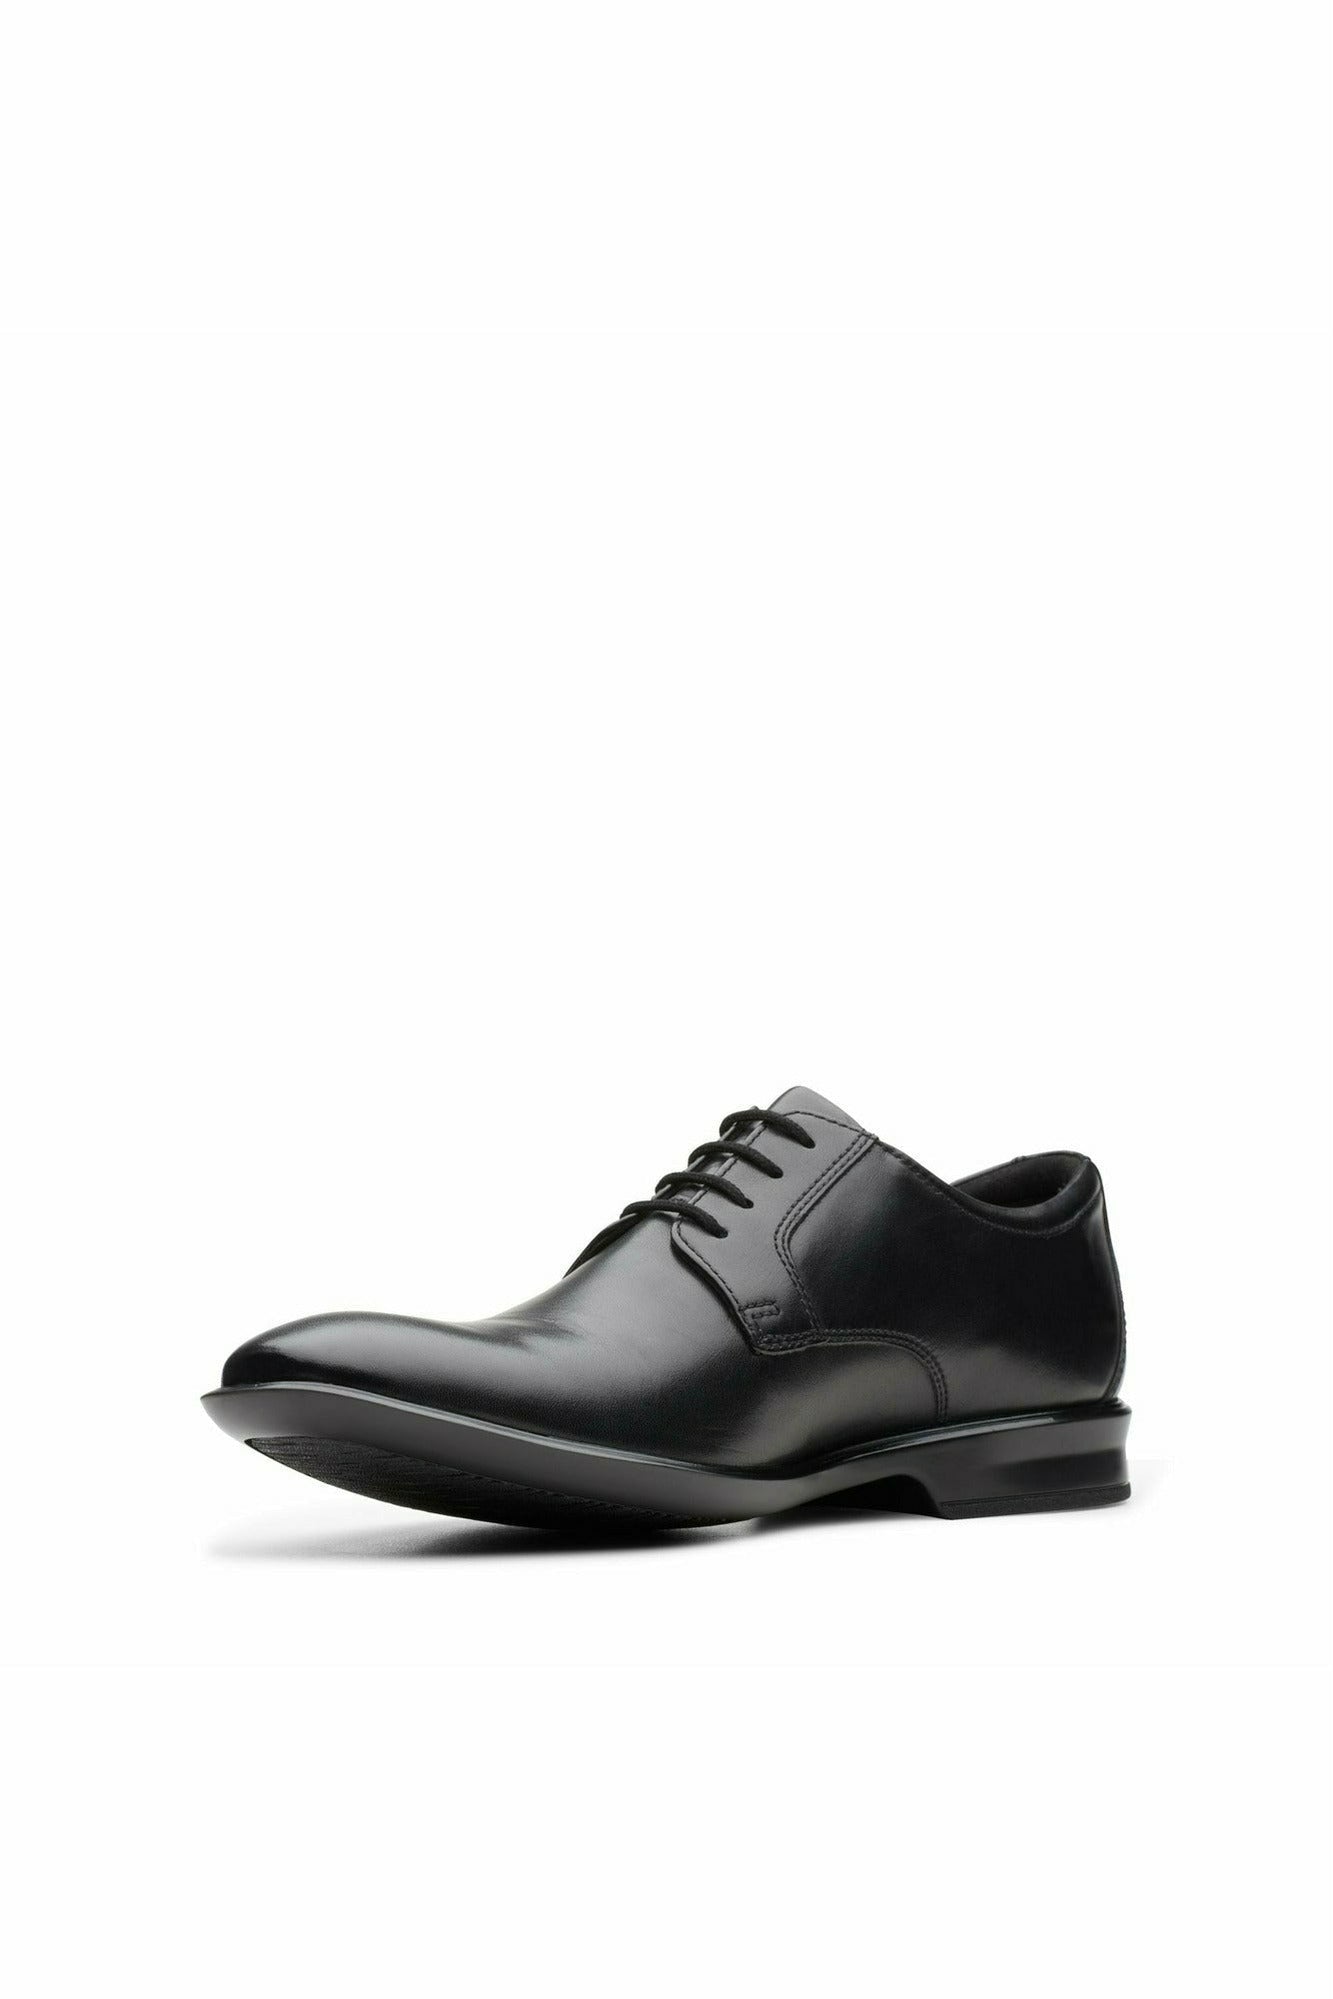 Clarks Bensley Lace Black leather